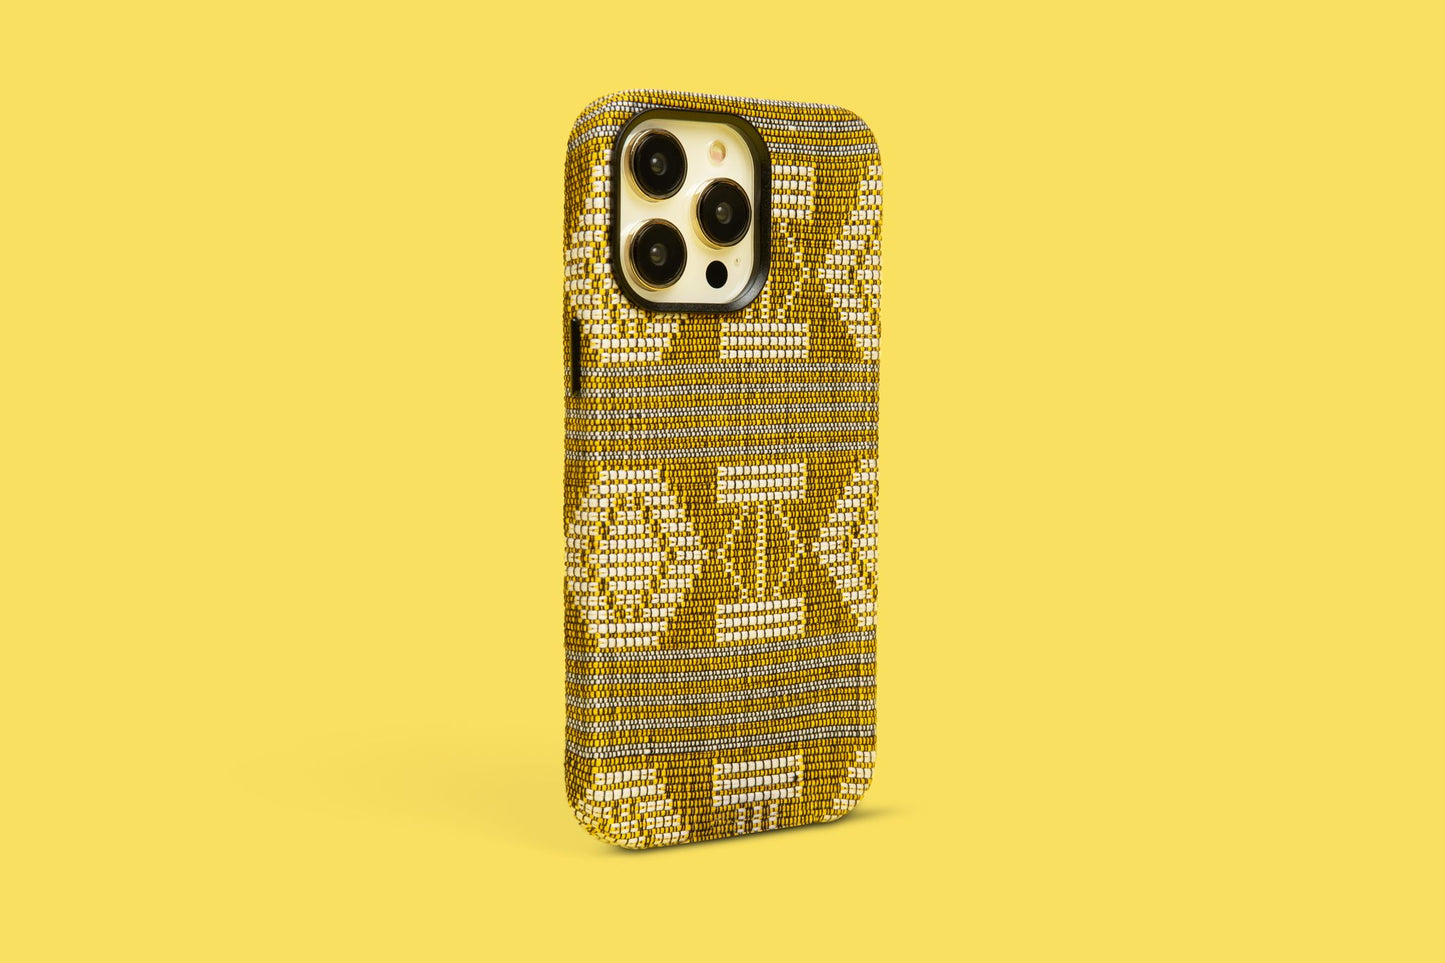 Savanna-inspired phone case with golden hues and complex patterns against a sunny yellow backdrop, a touch of African savanna for iPhone 12, 13, and 14 Pro Max, reflecting the simplicity and elegance of the vast plains.